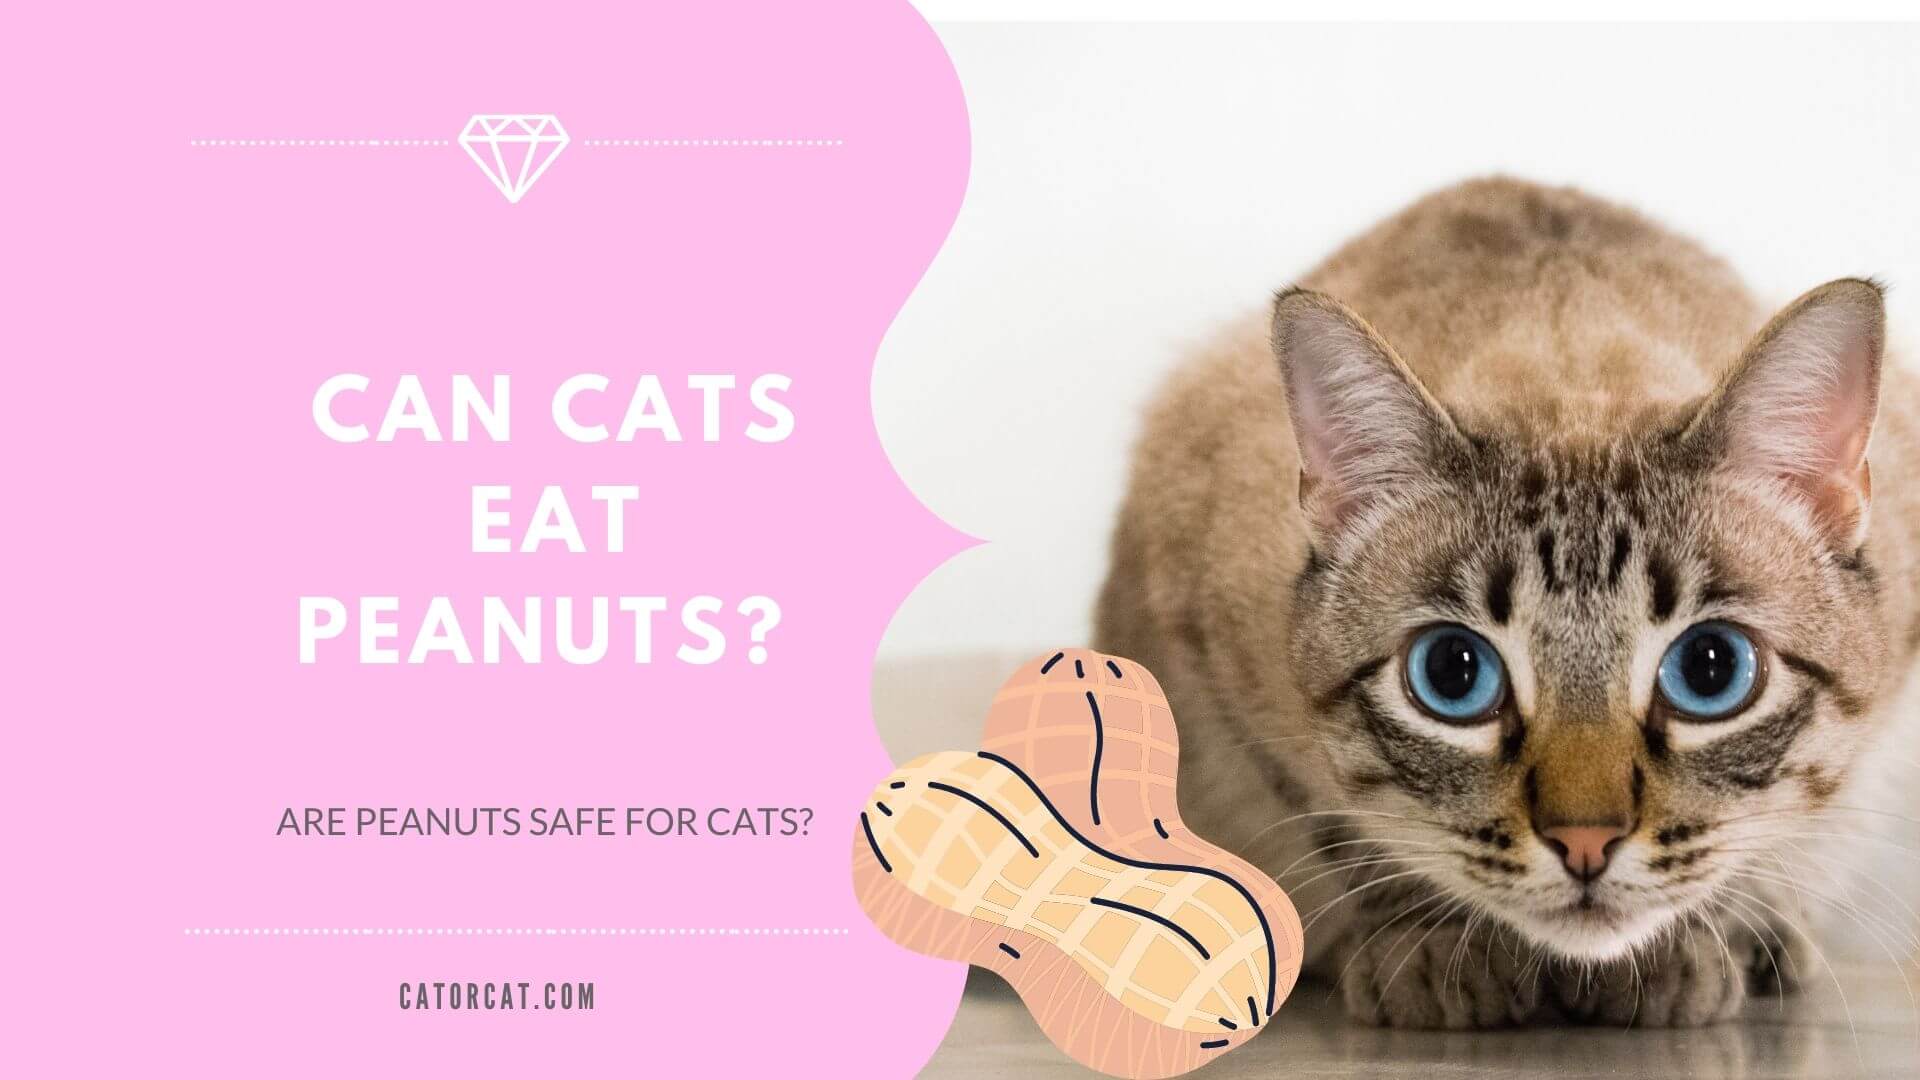 Can Cats Eat Peanuts? Are Peanuts Safe For Cats? Why is it